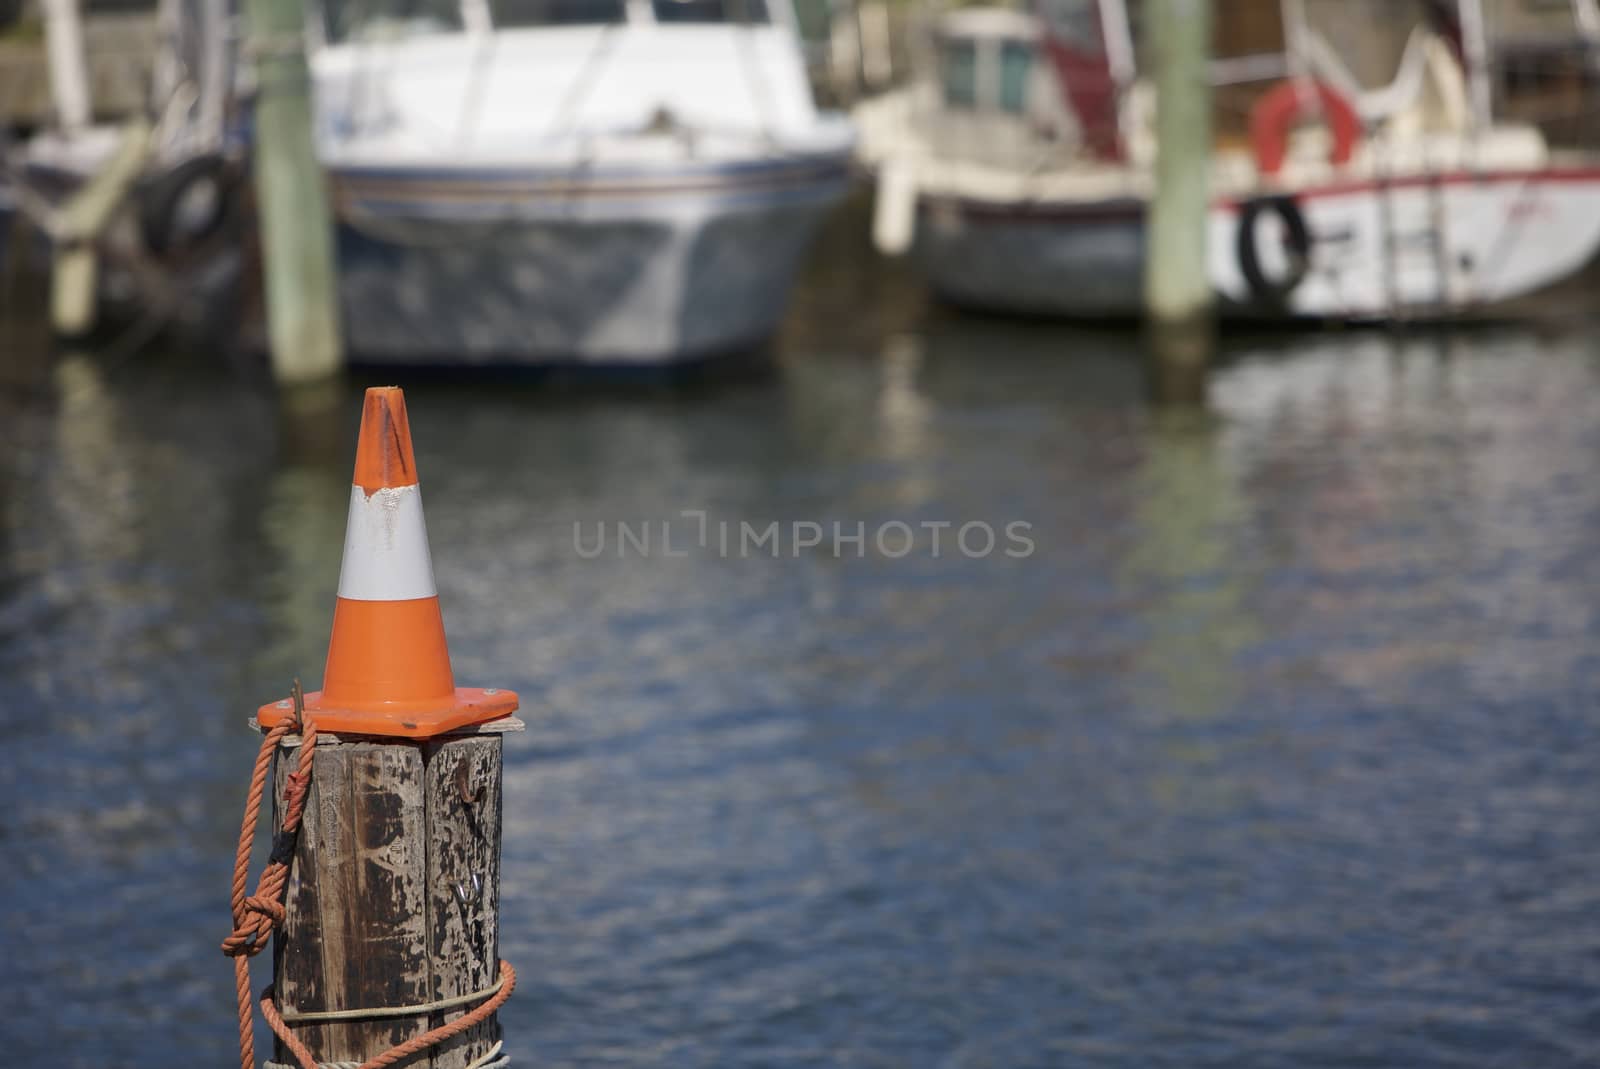 Cone on a pole, warning by instinia